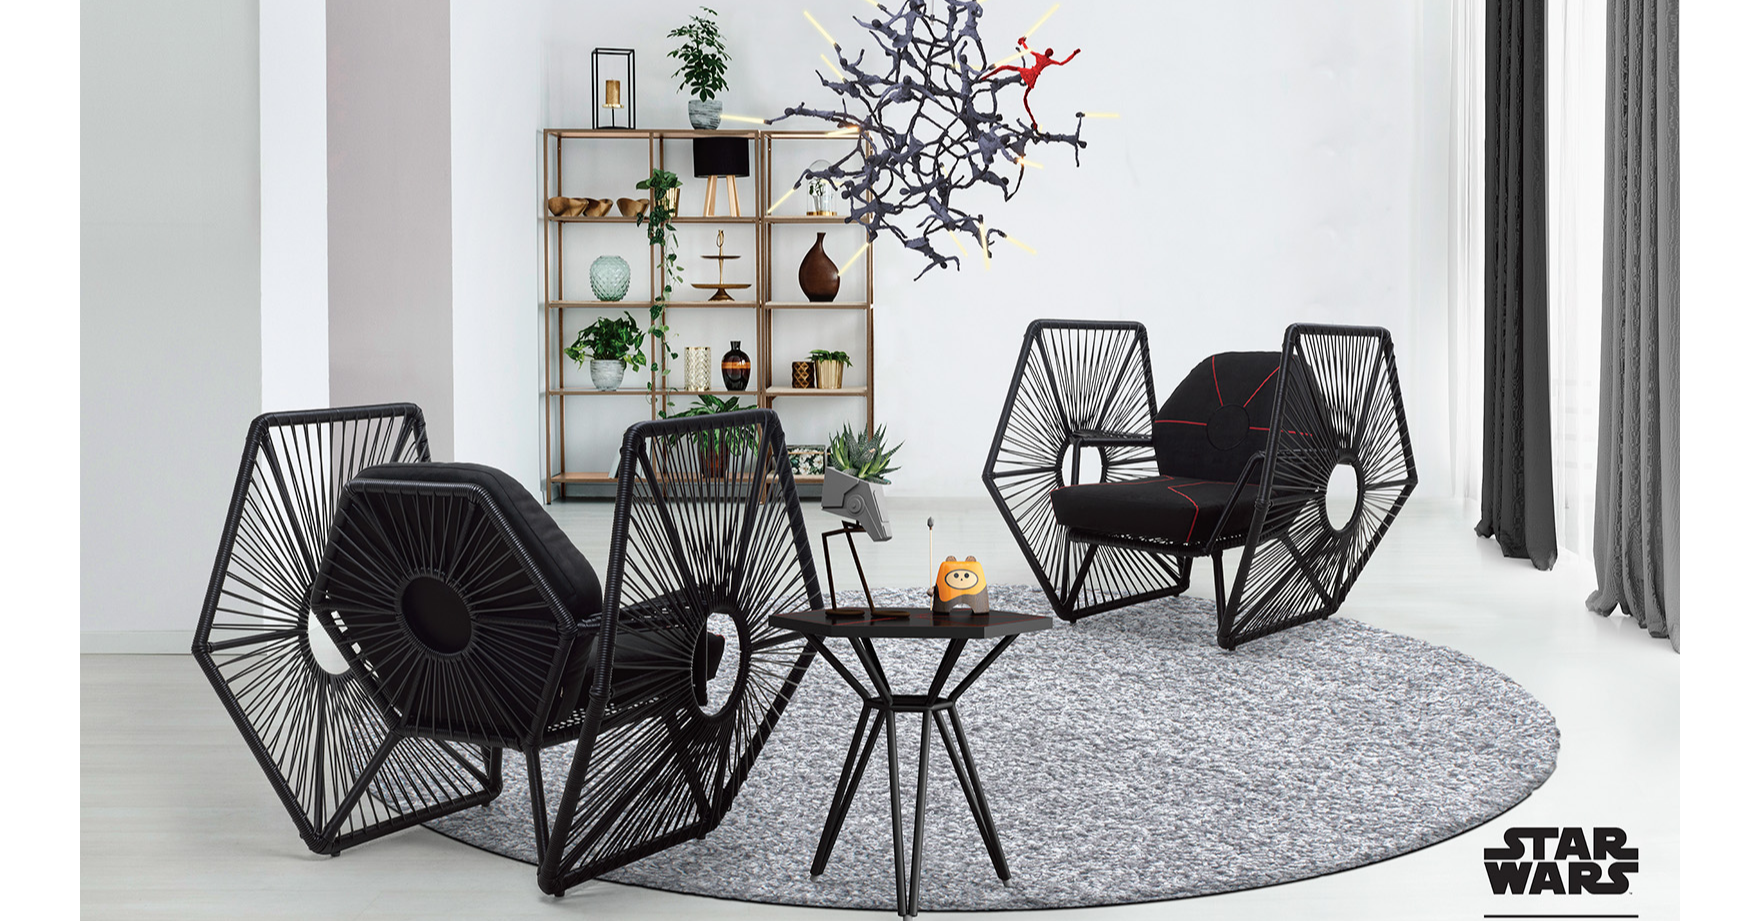 Darth Vader, Star Wars, TIE fighter, Stormtrooper, Sheev Palpatine, Design, Chewbacca, Chair, Jedi, , star wars, Furniture, Chair, Room, Table, Interior design, Rocking chair, Folding chair, Living room, House, Houseplant